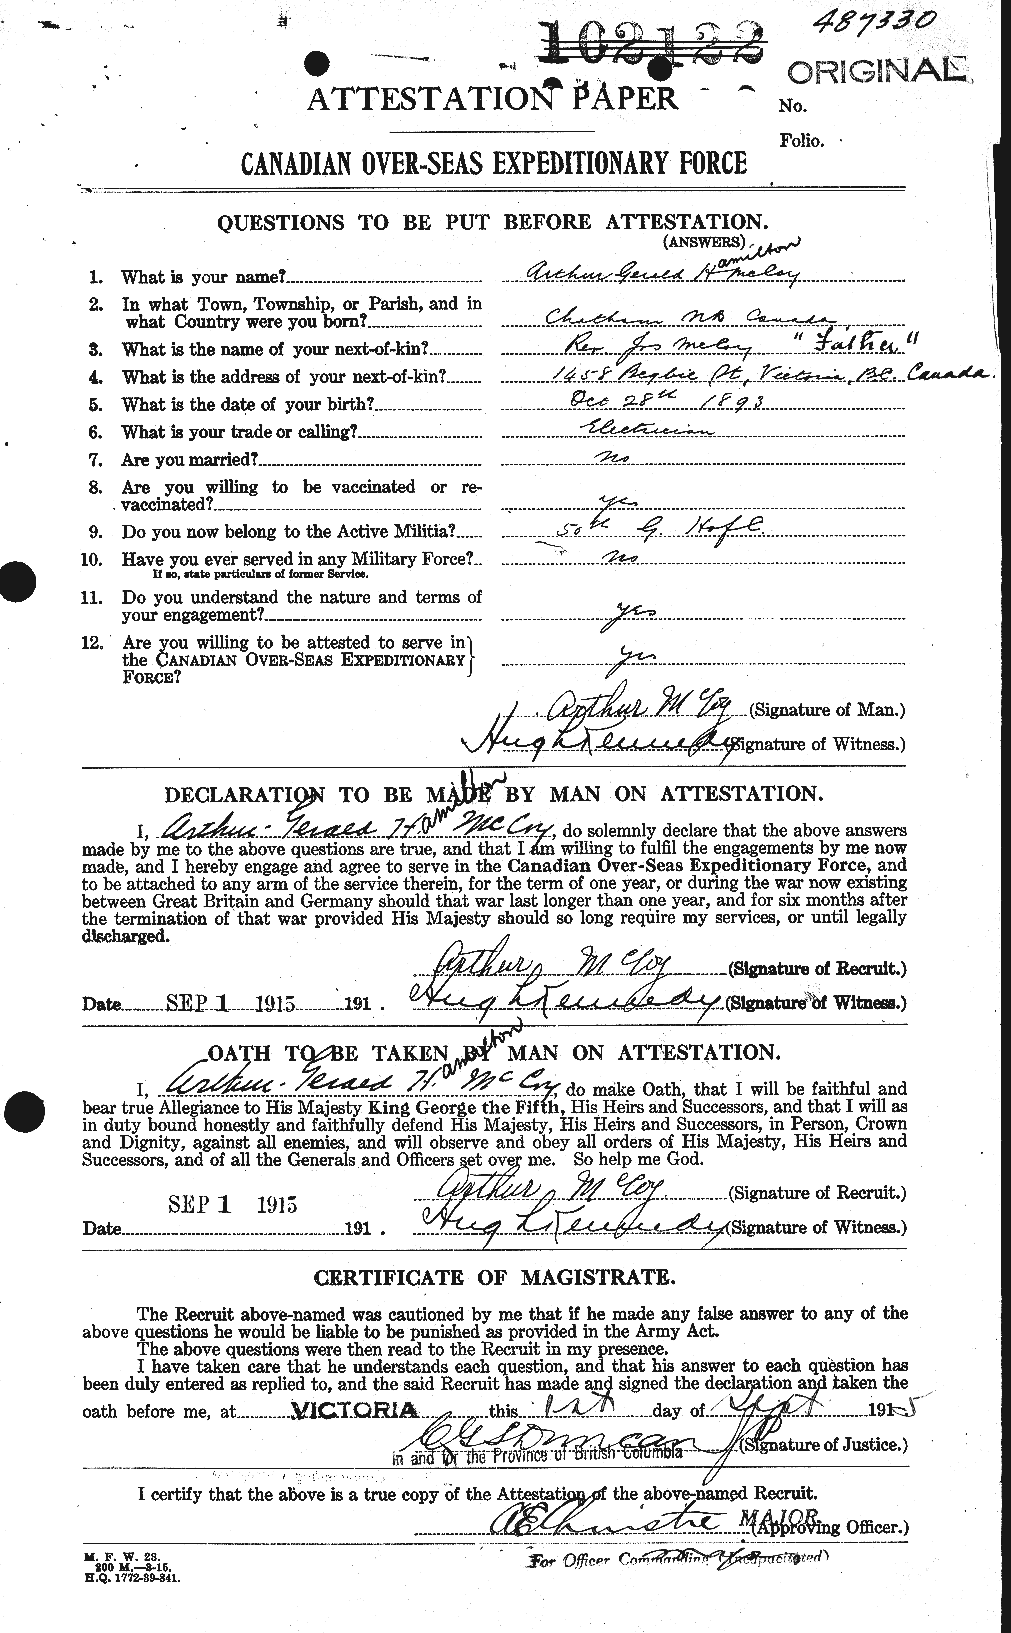 Personnel Records of the First World War - CEF 134895a